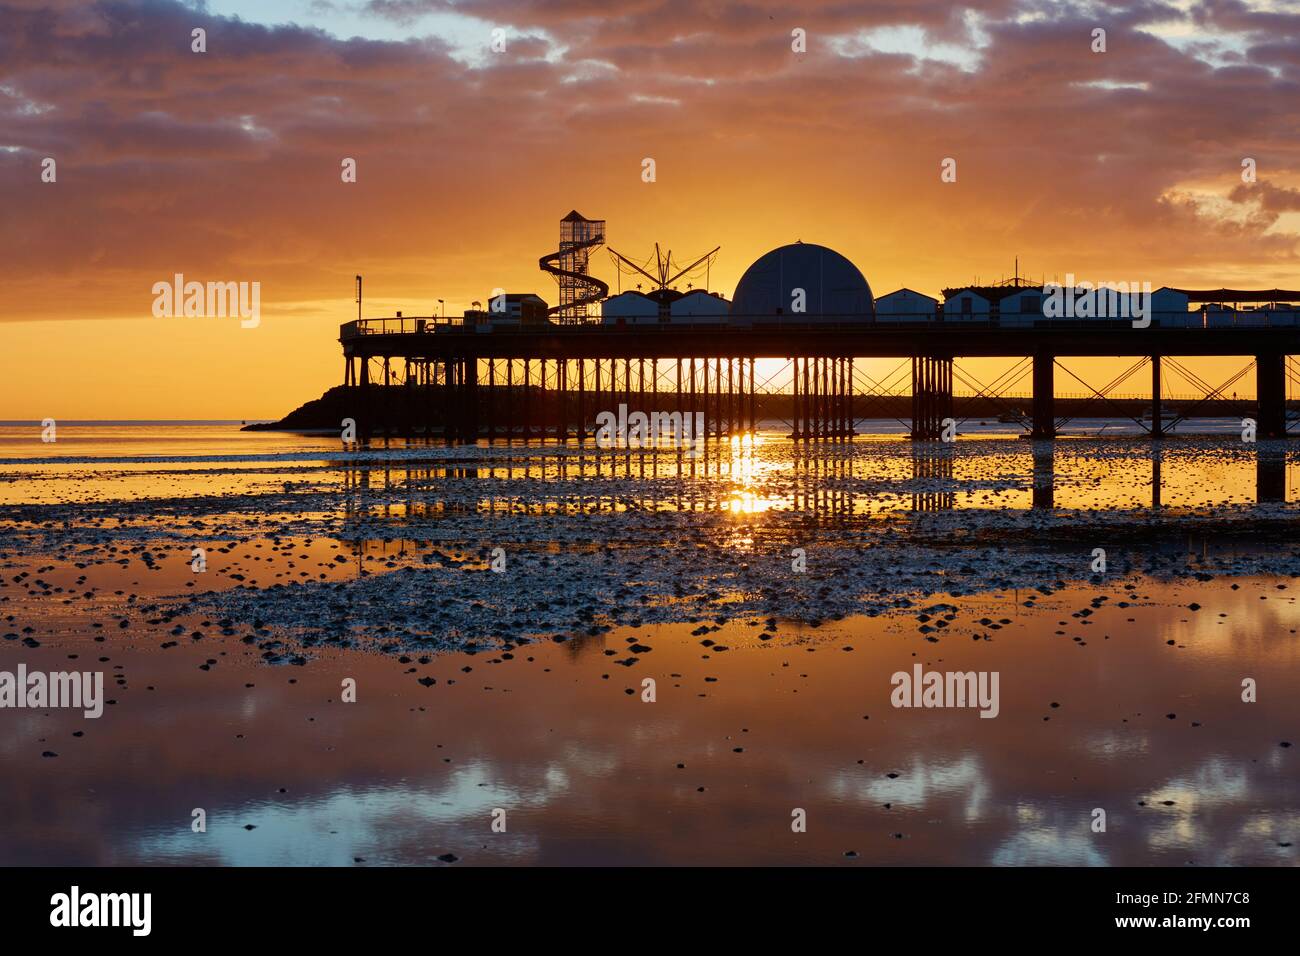 Herne Bay, Kent, UK. 11th May 2021: UK Weather. Sunrise at Herne Bay pier. With the country coming out of lockdown and the summer approaching the coastal resorts are expecting an influx of tourists as people holiday in the UK. The weather is set to be warm with a mixture of sunshine and showers for the next few days. Credit: Alan Payton/Alamy Live News Stock Photo